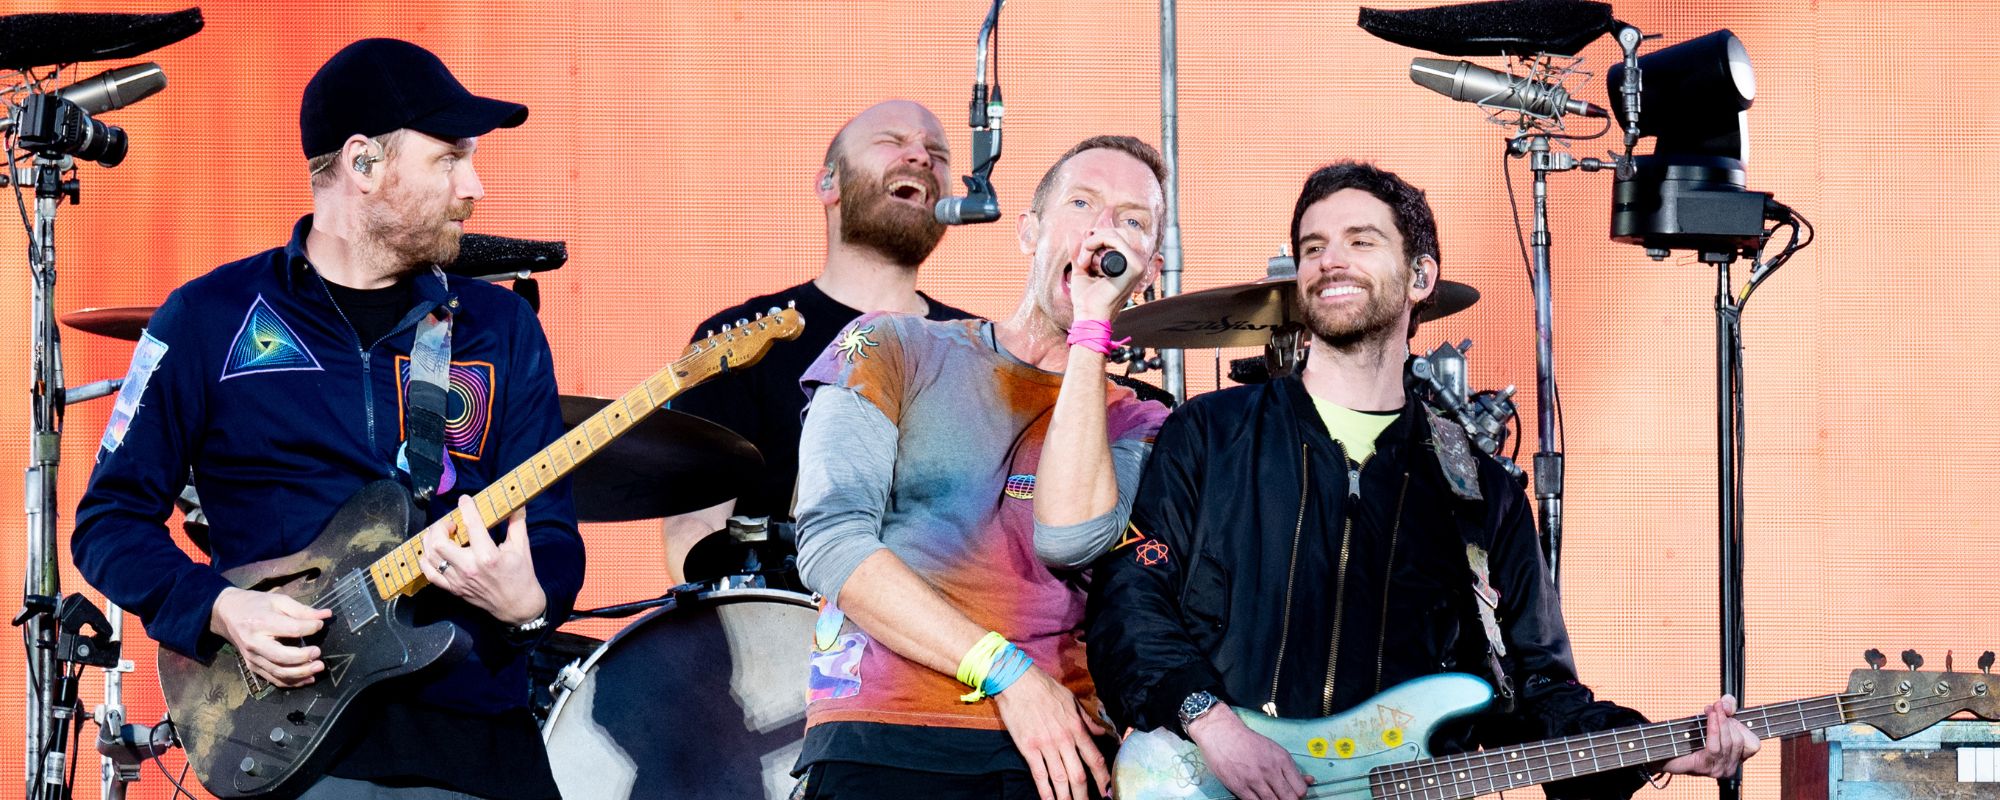 Coldplay Reveals They Reduced Carbon Footprint by More Than 50% During Current Tour